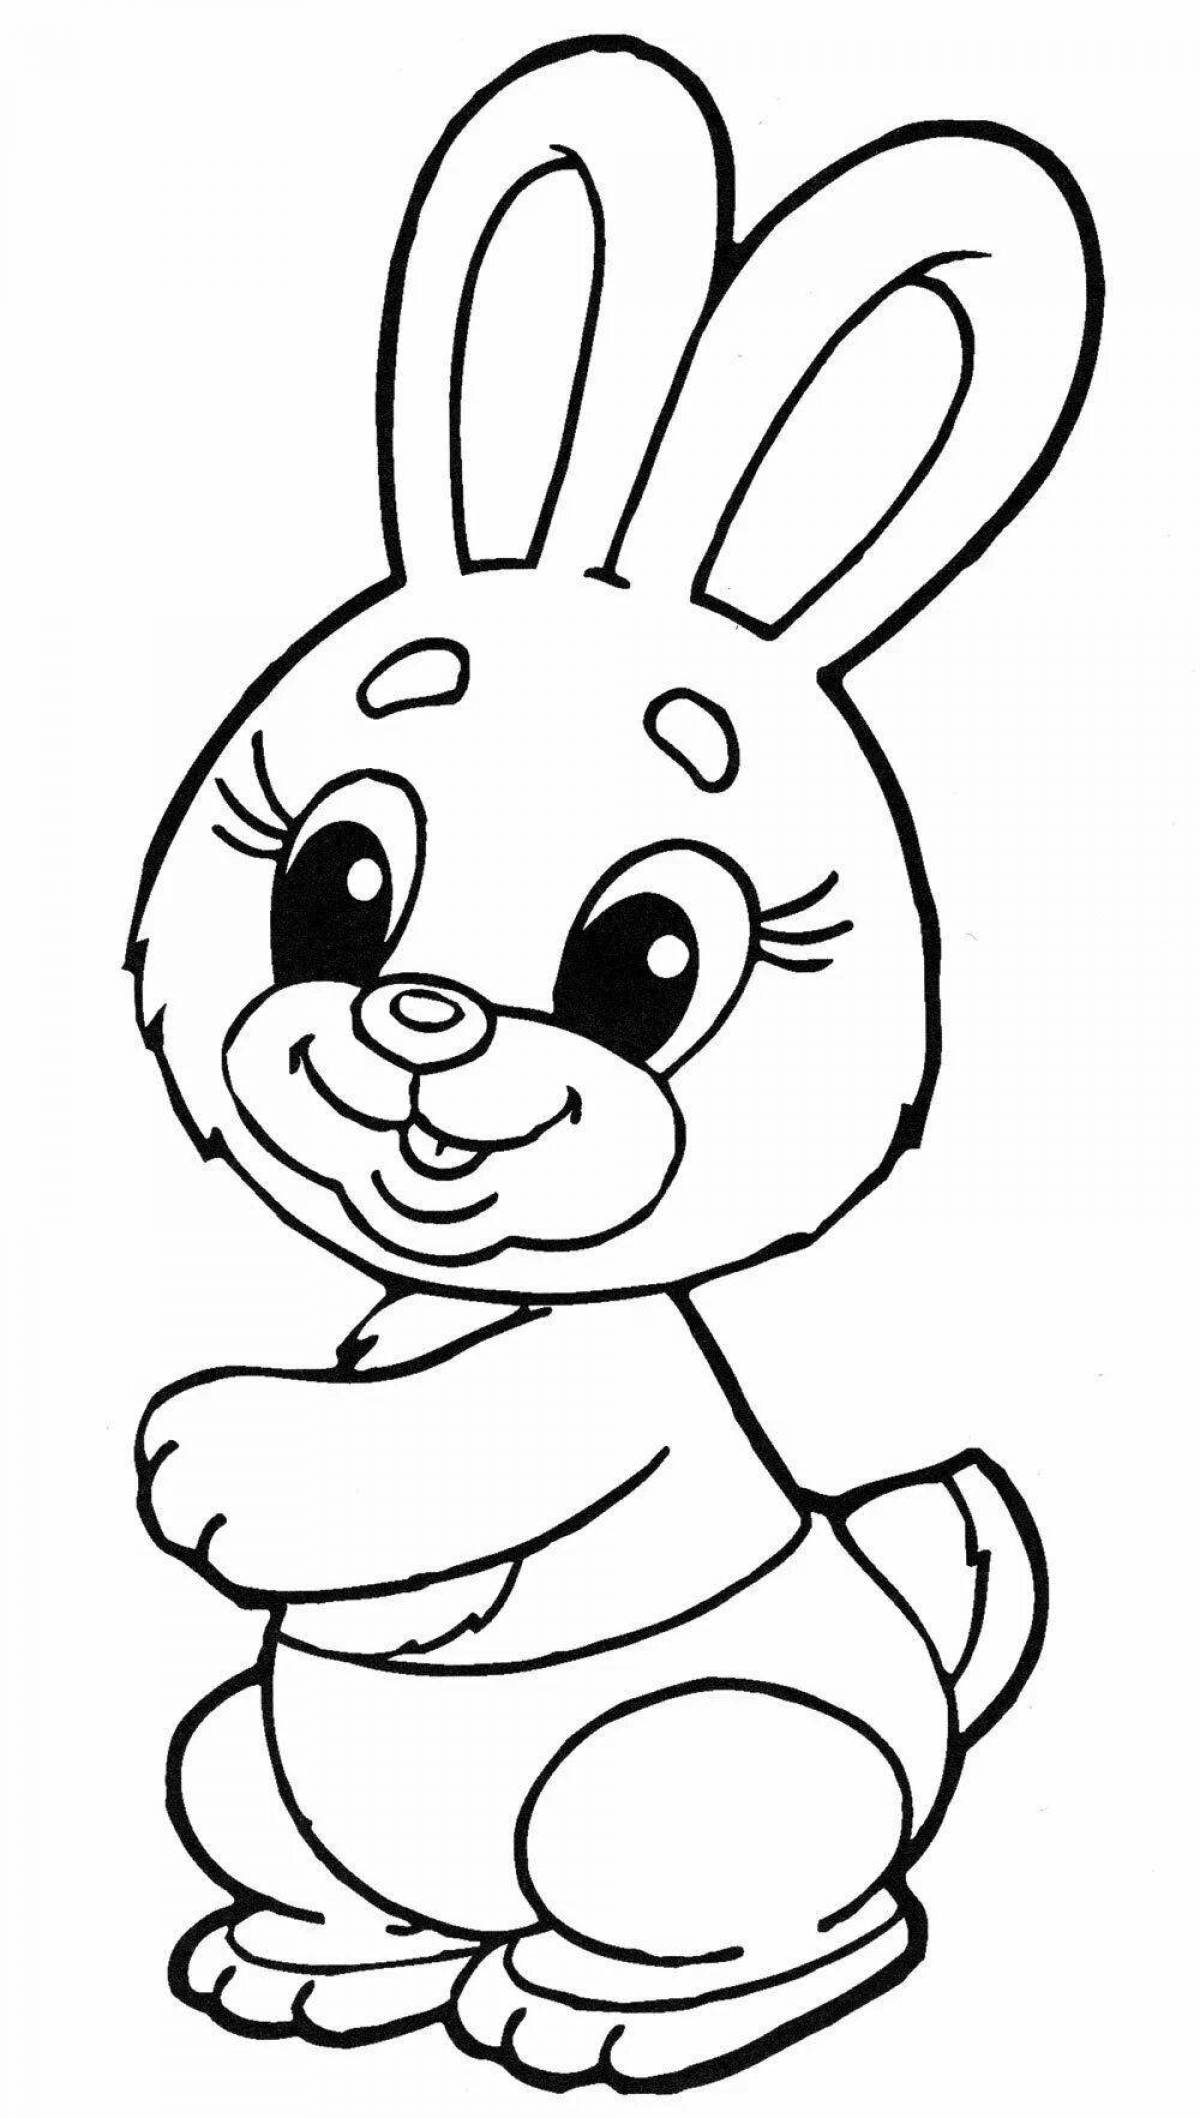 Colorful bright bunny coloring page